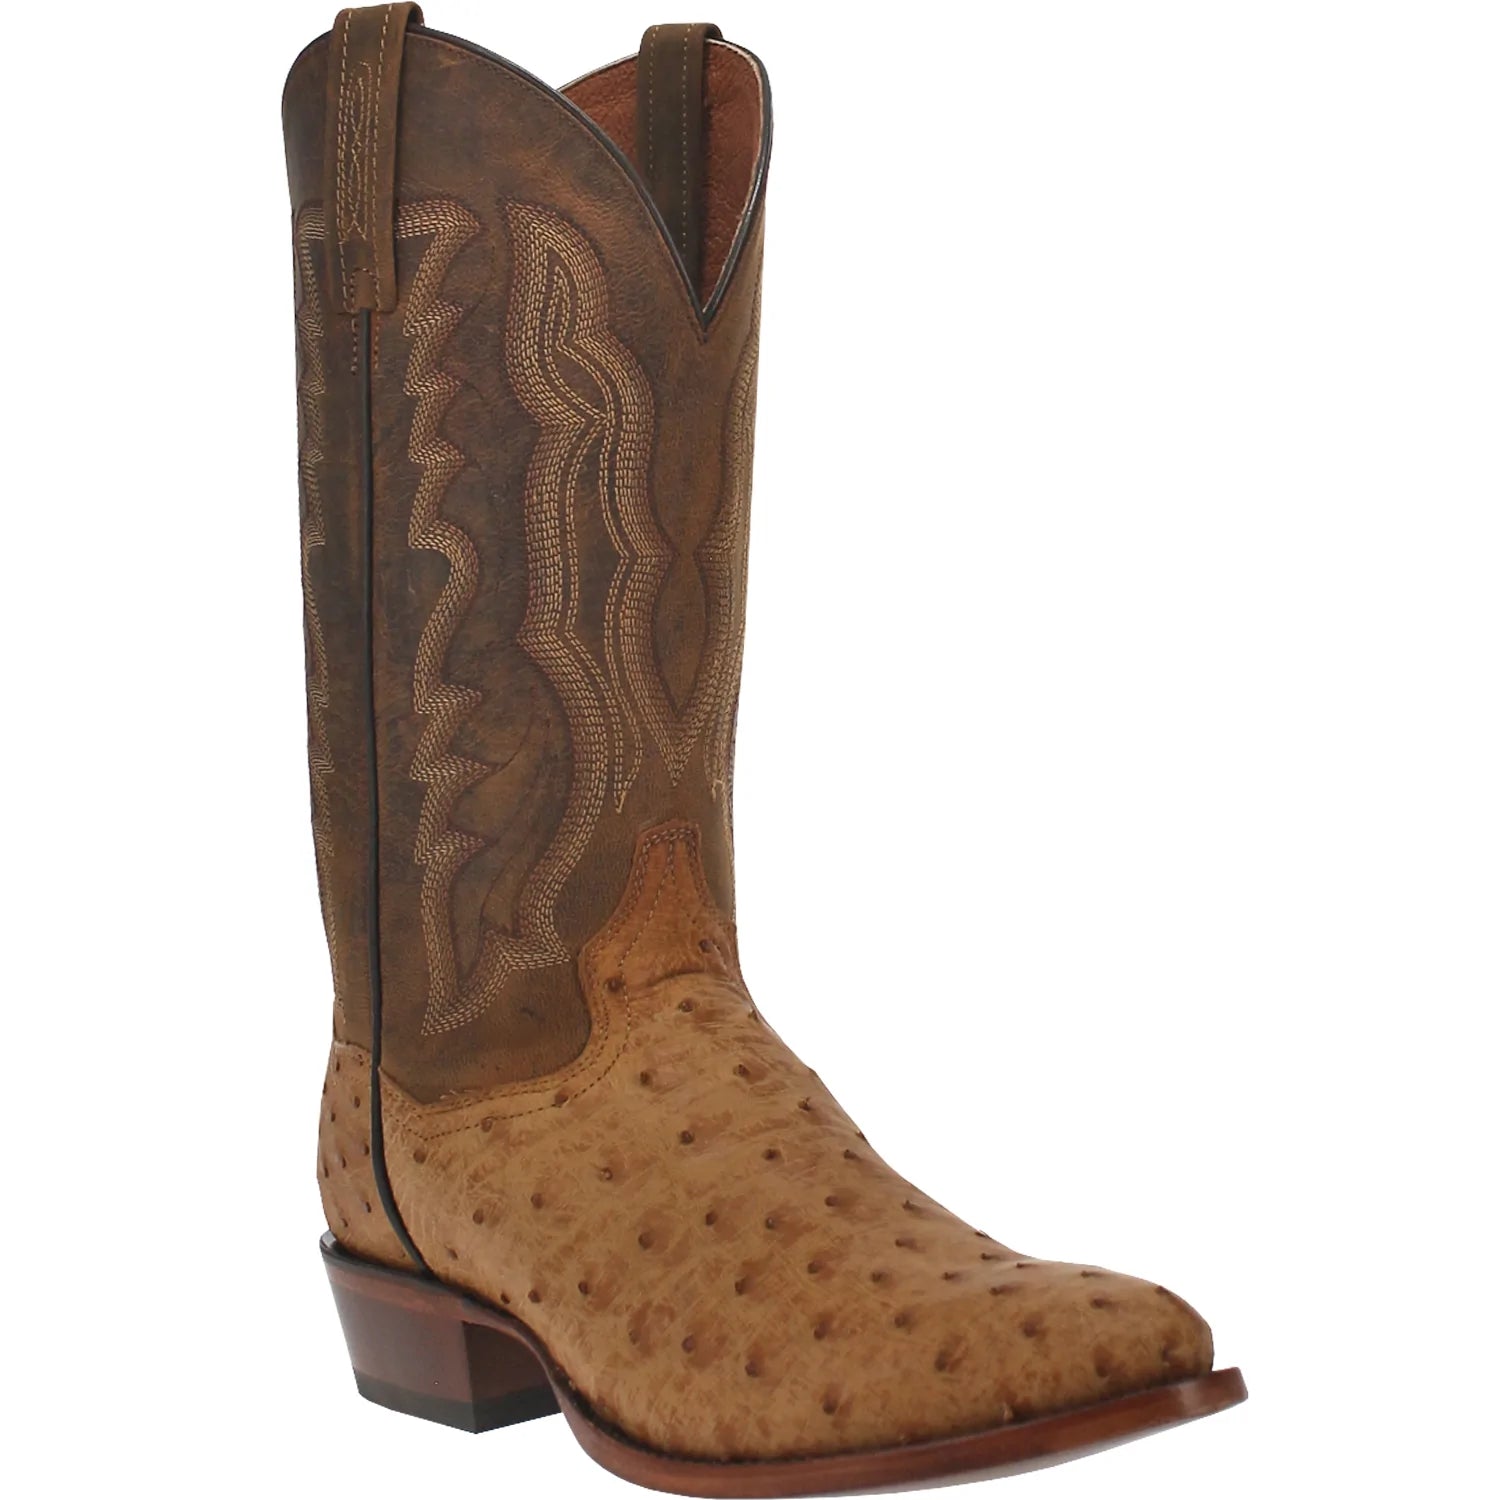 DAN POST GEHRIG FULL QUILL OSTRICH BOOT - SADDLE - Nate's Western Wear